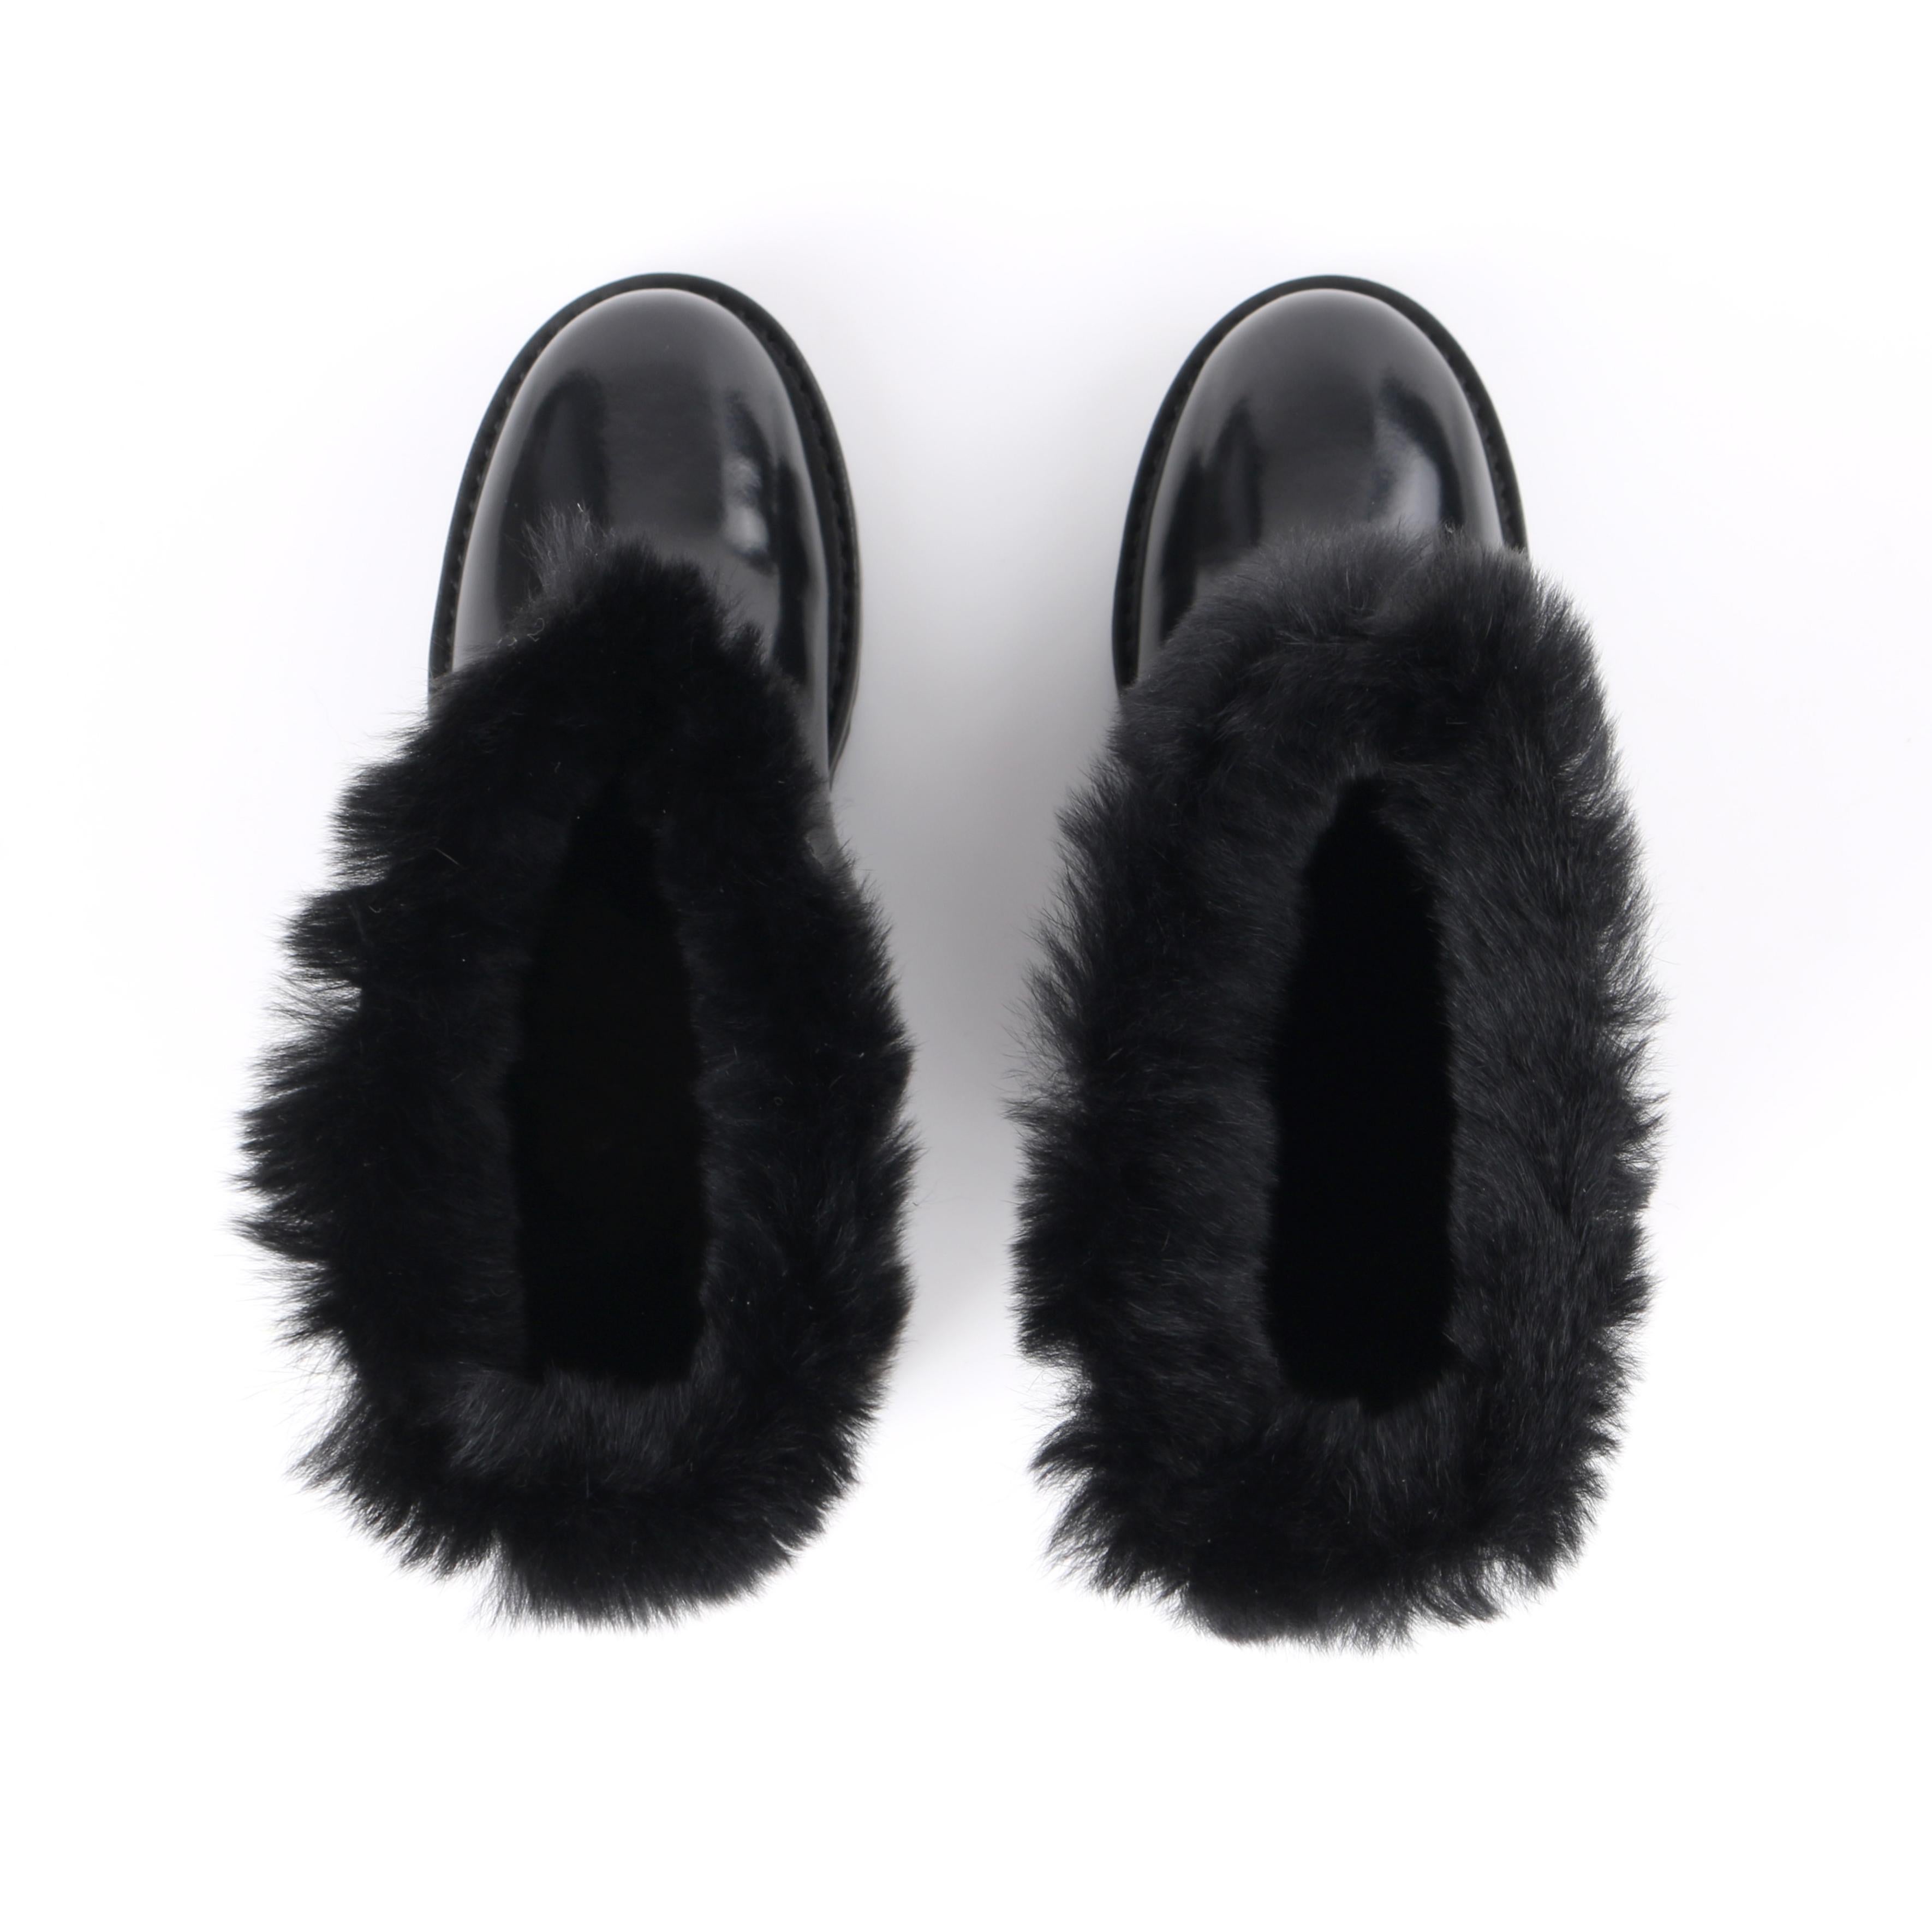 DOLCE & GABBANA Black Leather Lapin Fur Lined Calf High Moto Cold Weather Boots For Sale 2